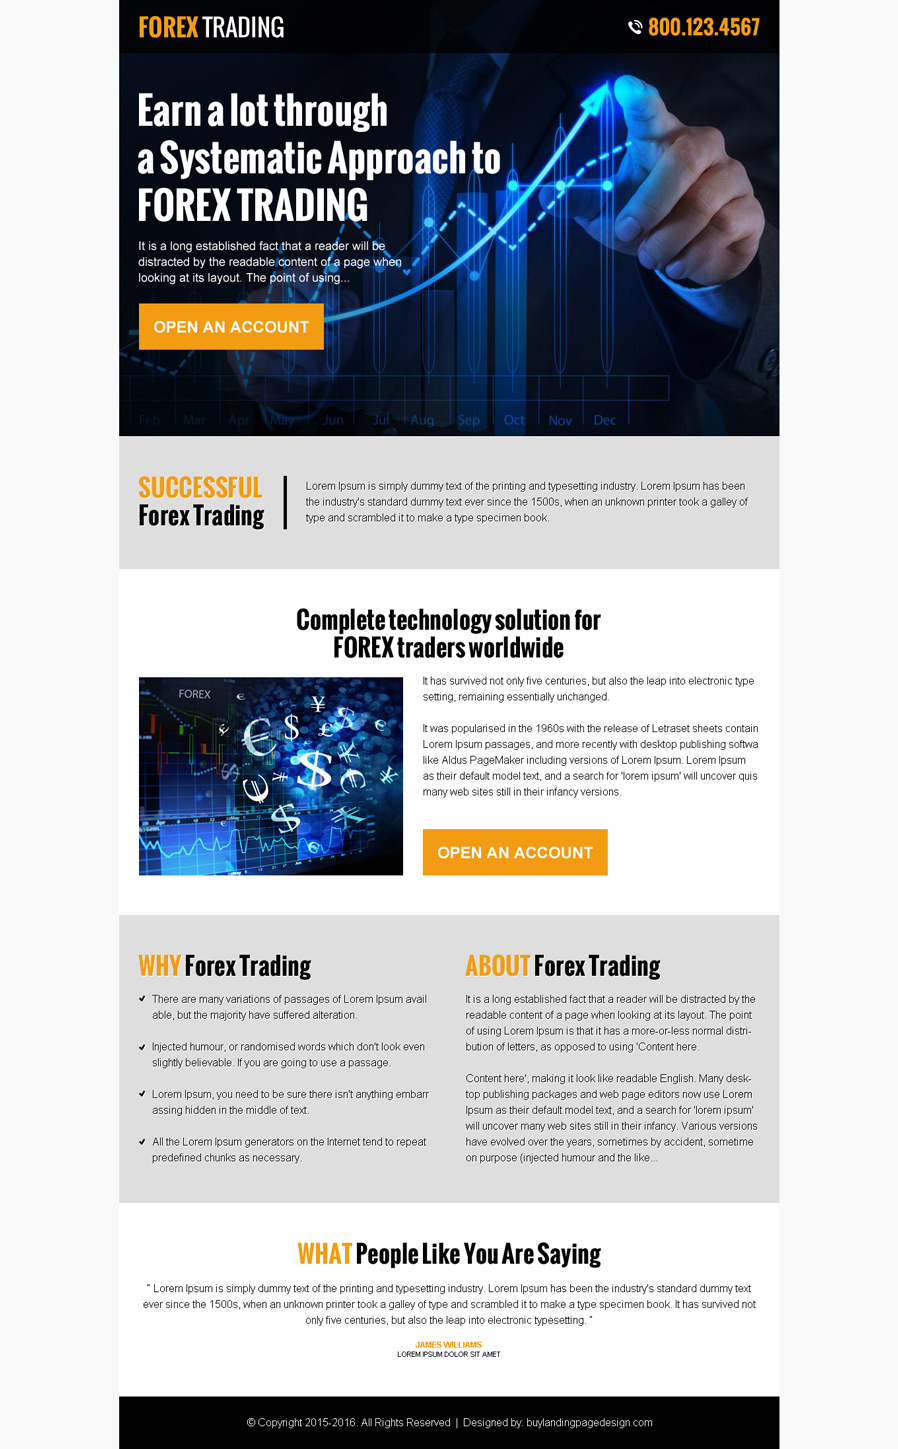 Forex landing page template